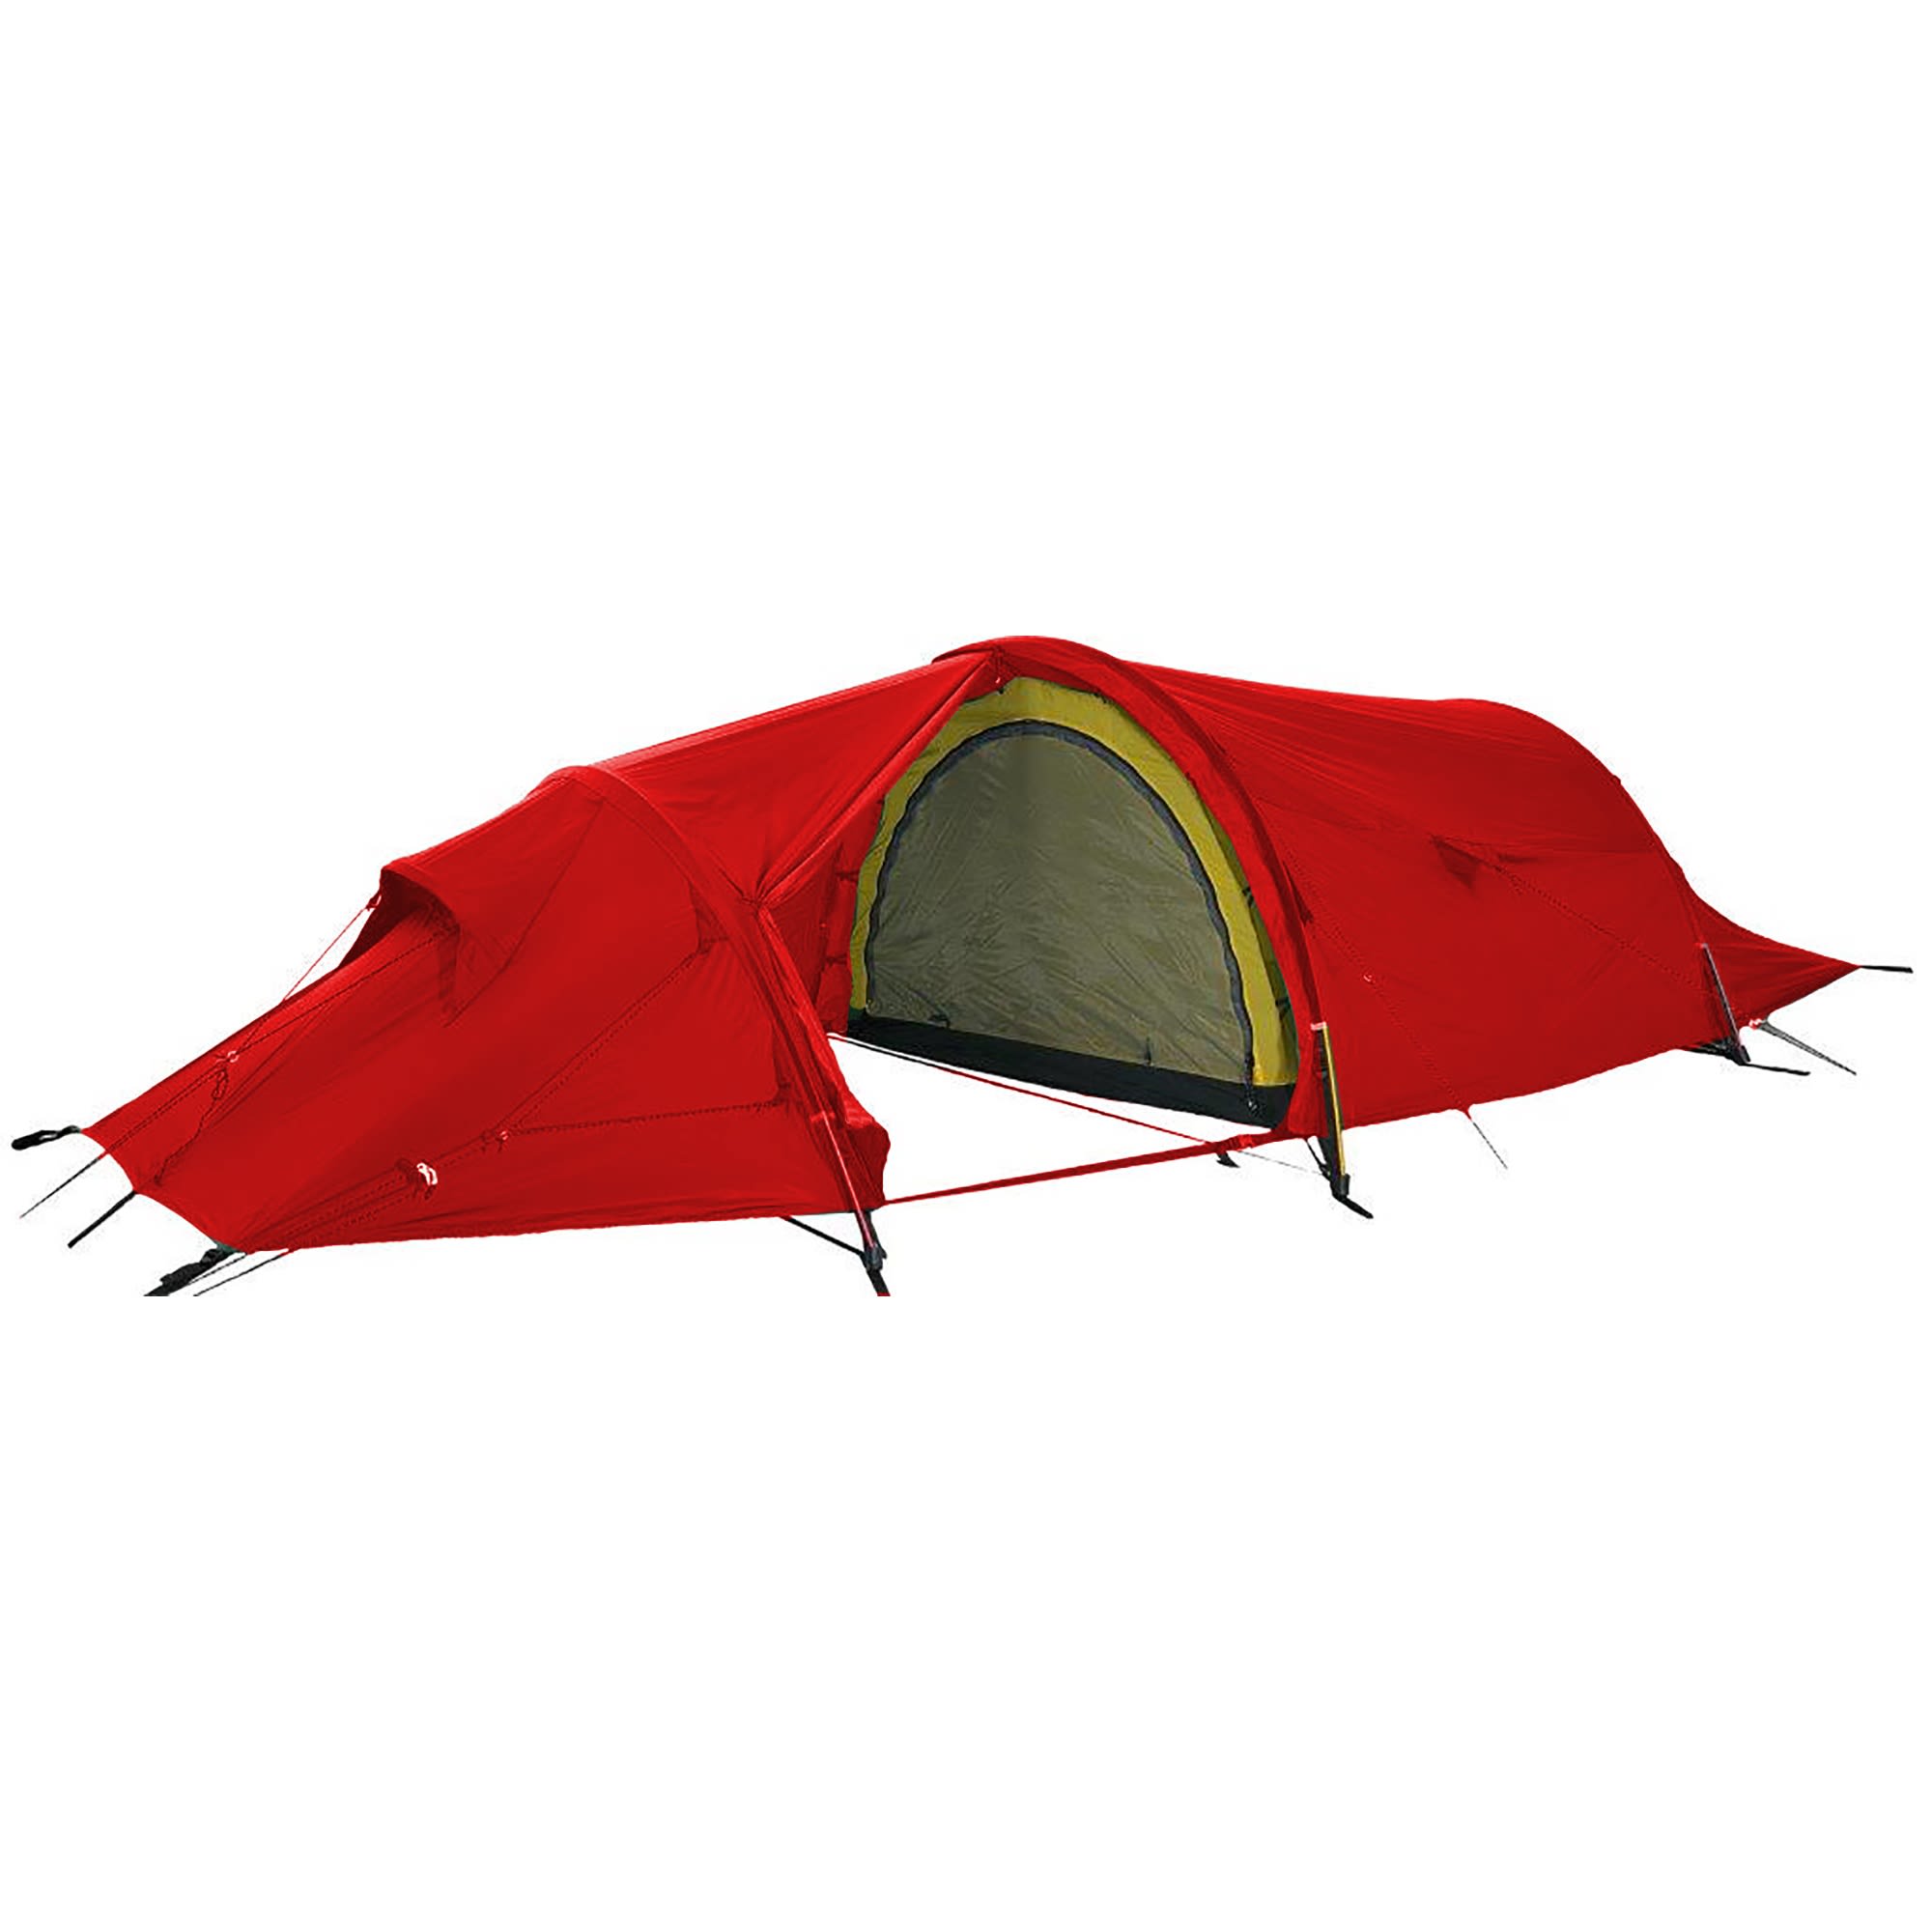 Buy Bergans Trillemarka Tent from Outnorth